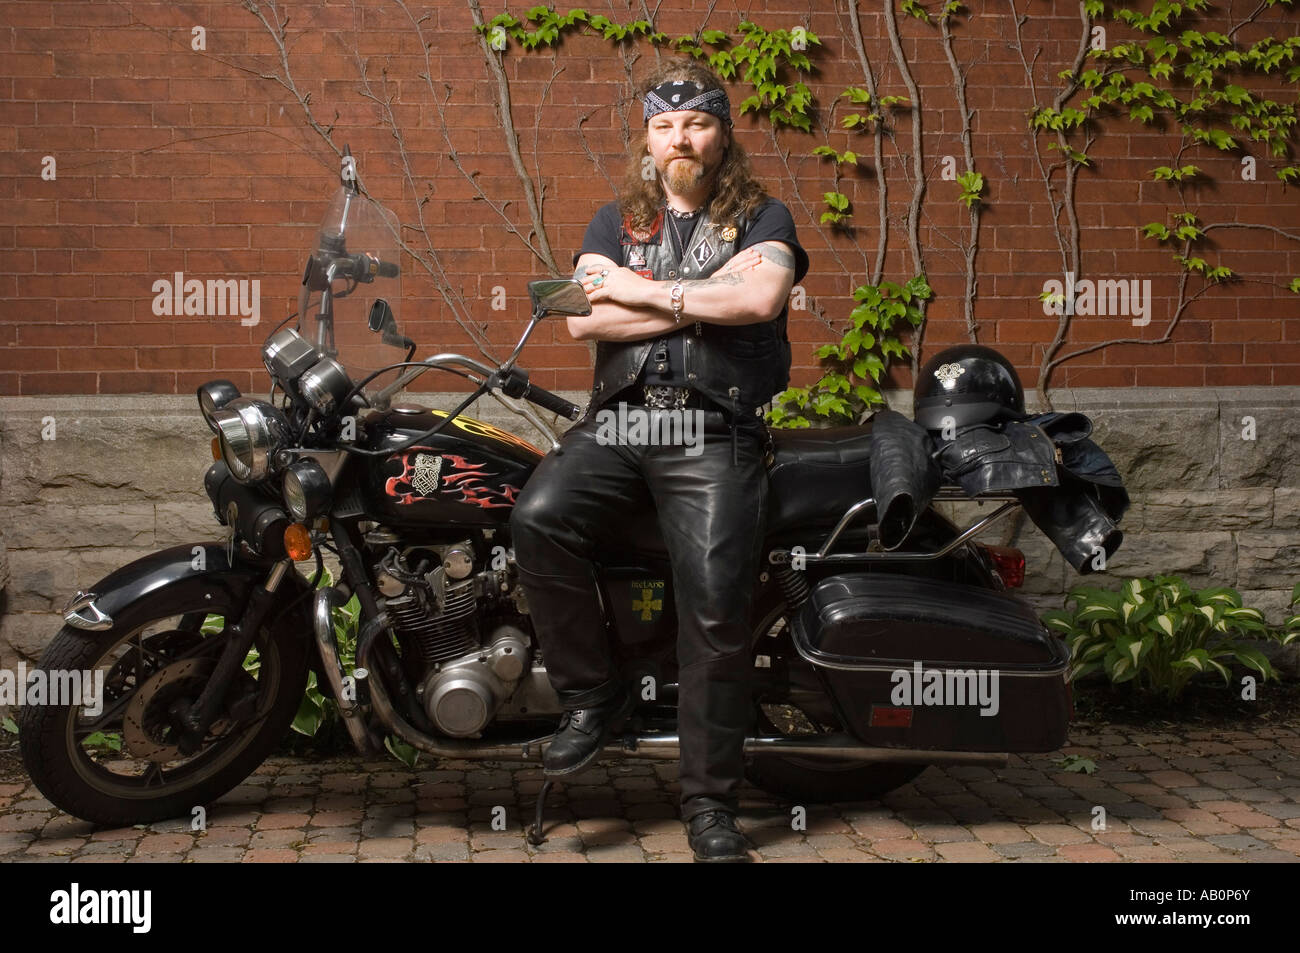 Motorcyclist relaxes by his bike Stock Photo